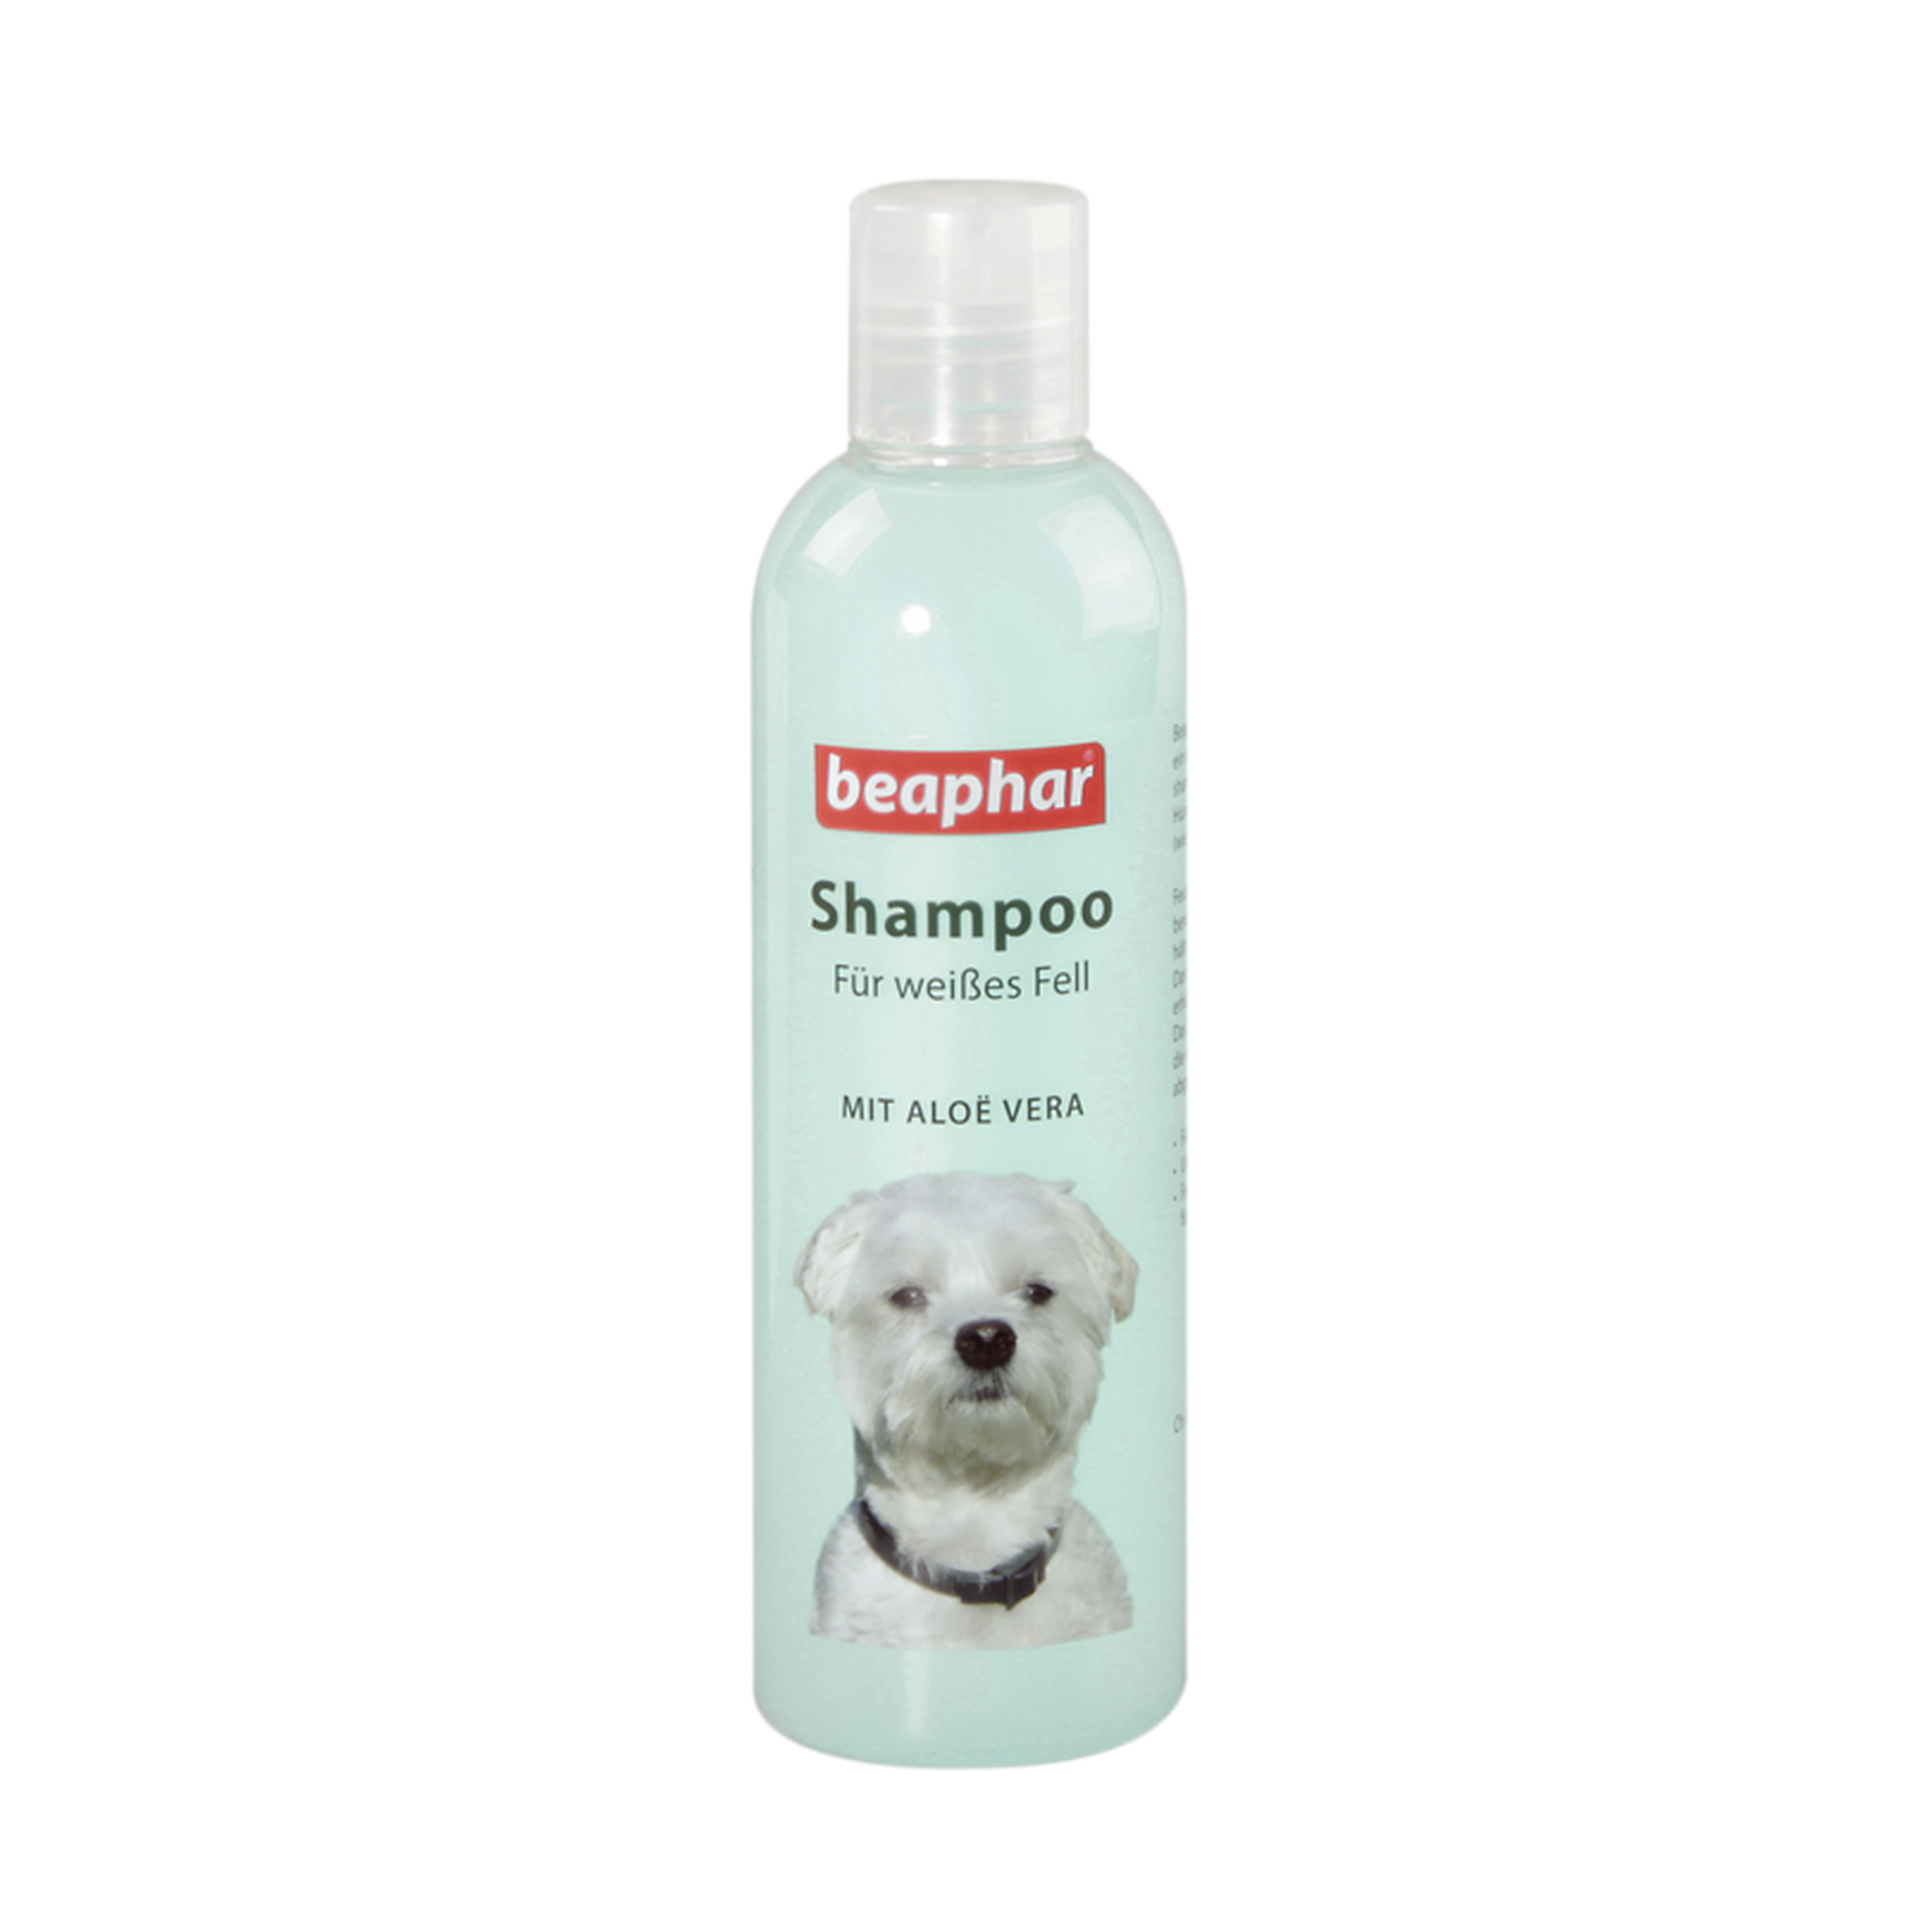 Hunde-Shampoo für weißes Fell 250 ml + product picture